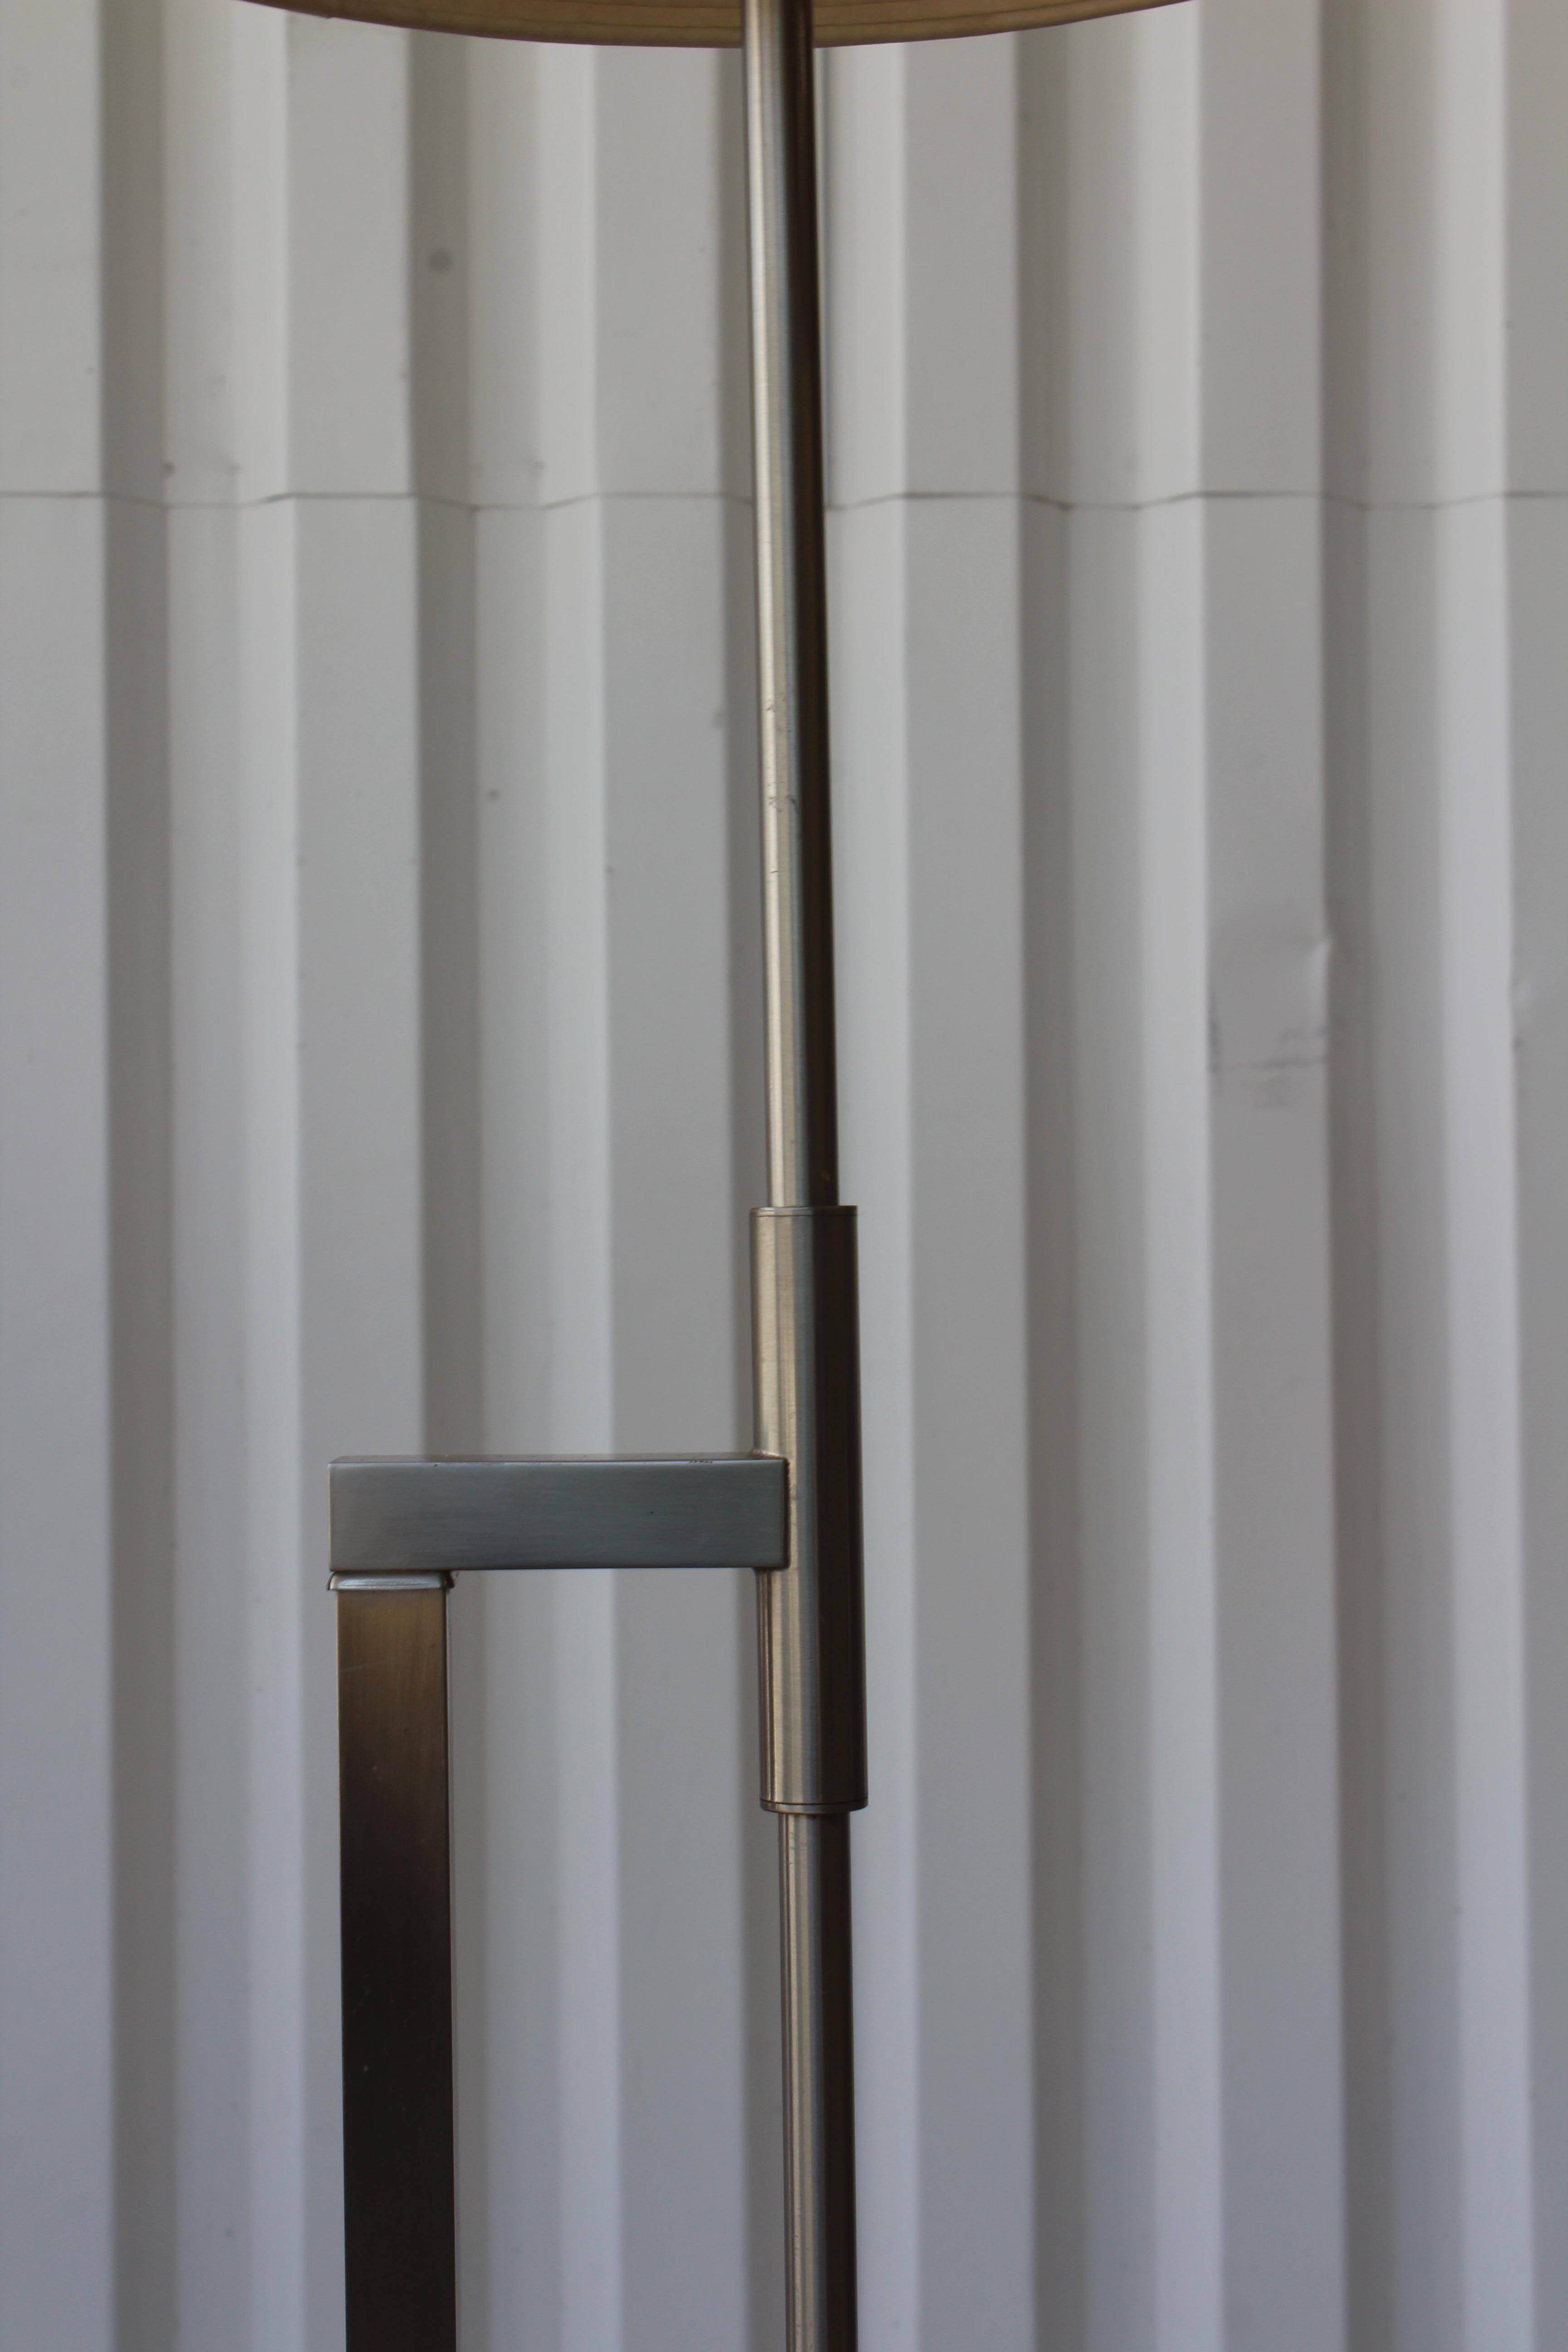 Mid-Century Modern Adjustable Floor Lamp by Laurel, U.S.A, 1960s. One Available.